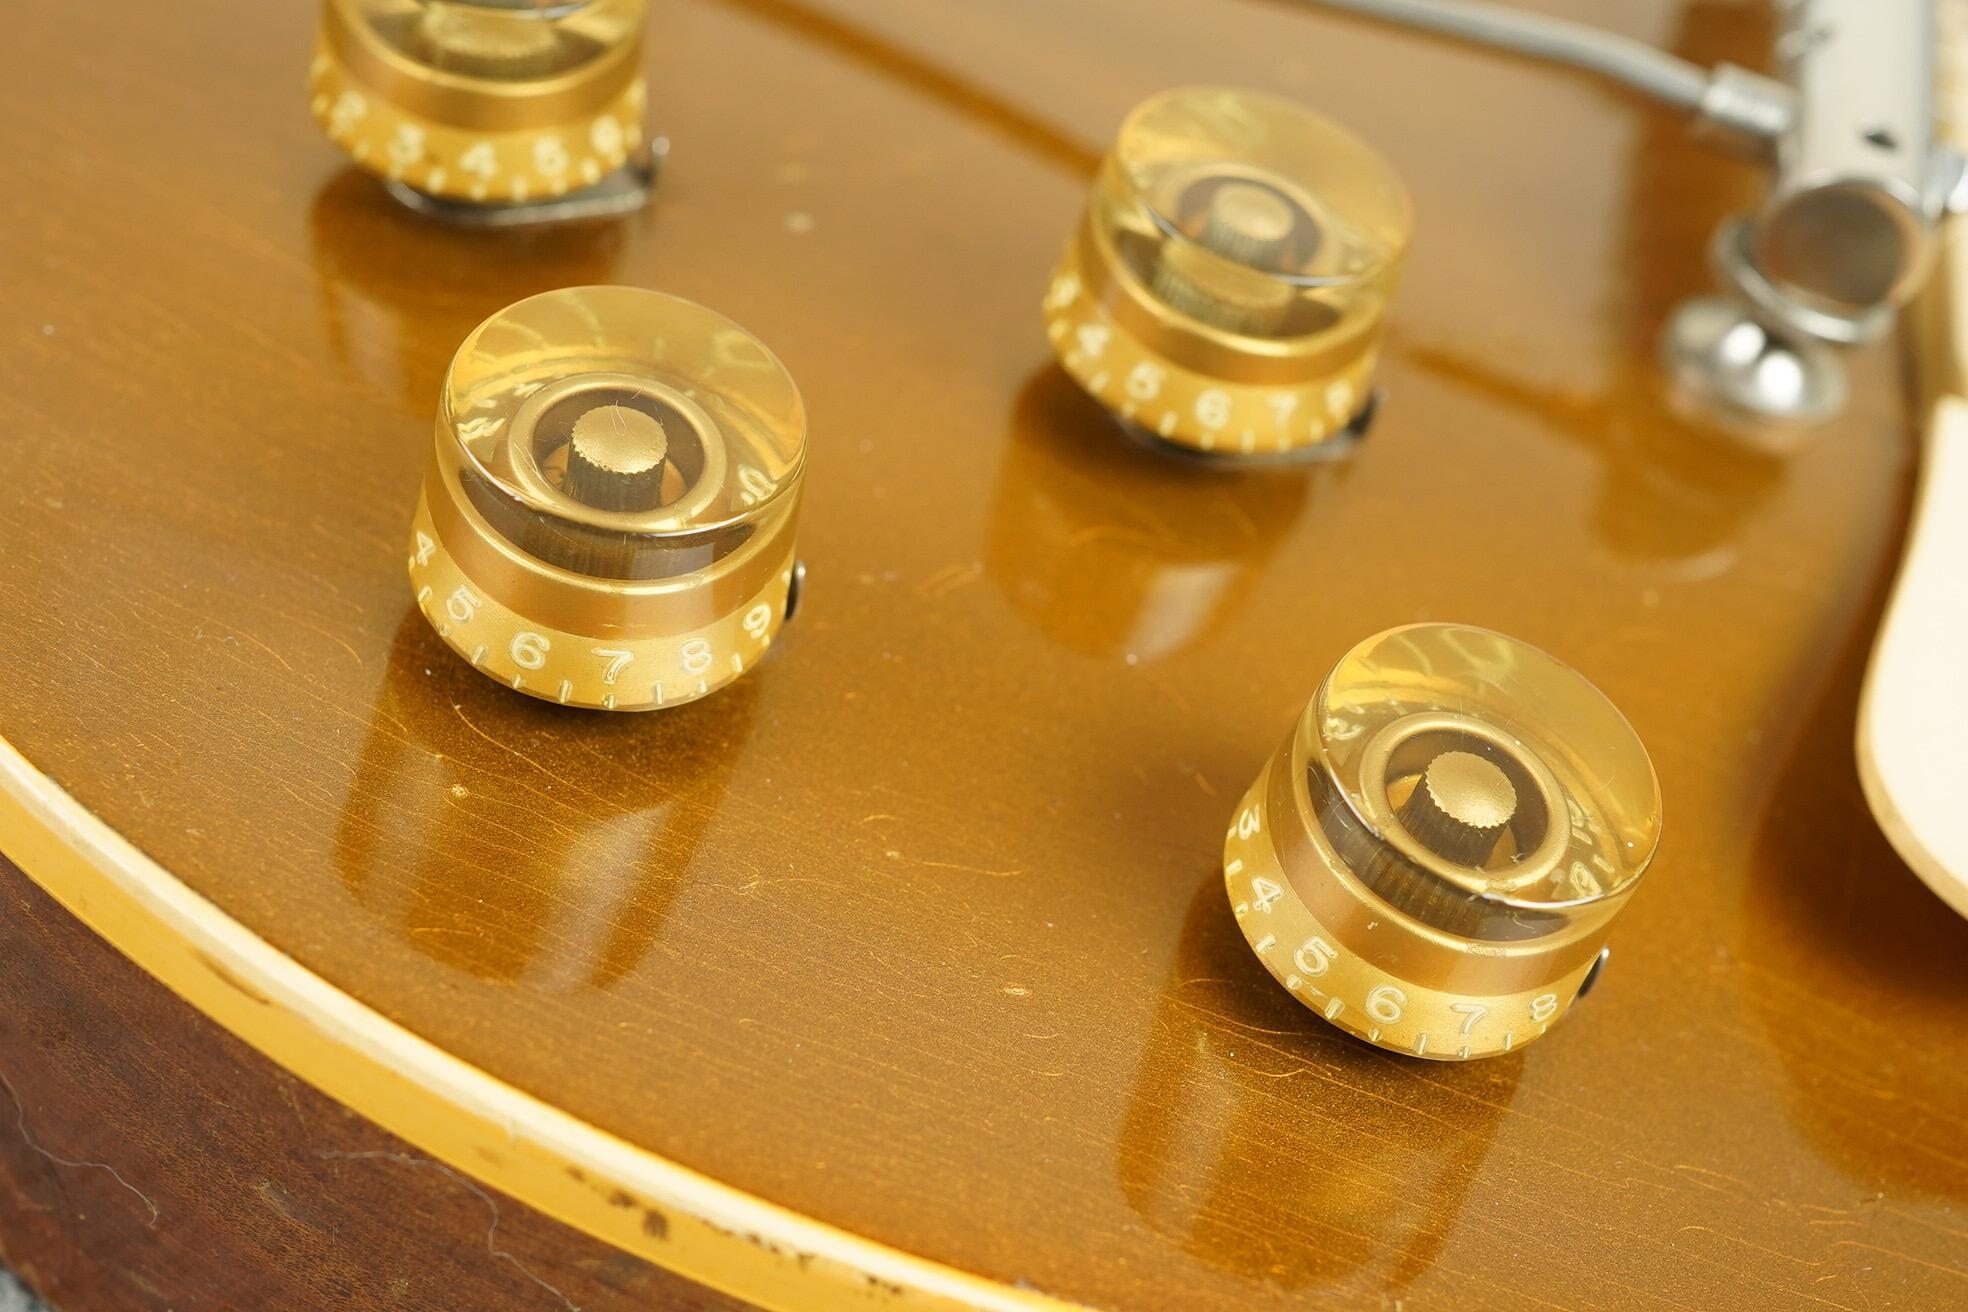 1952 Gibson Les Paul Goldtop early unbound